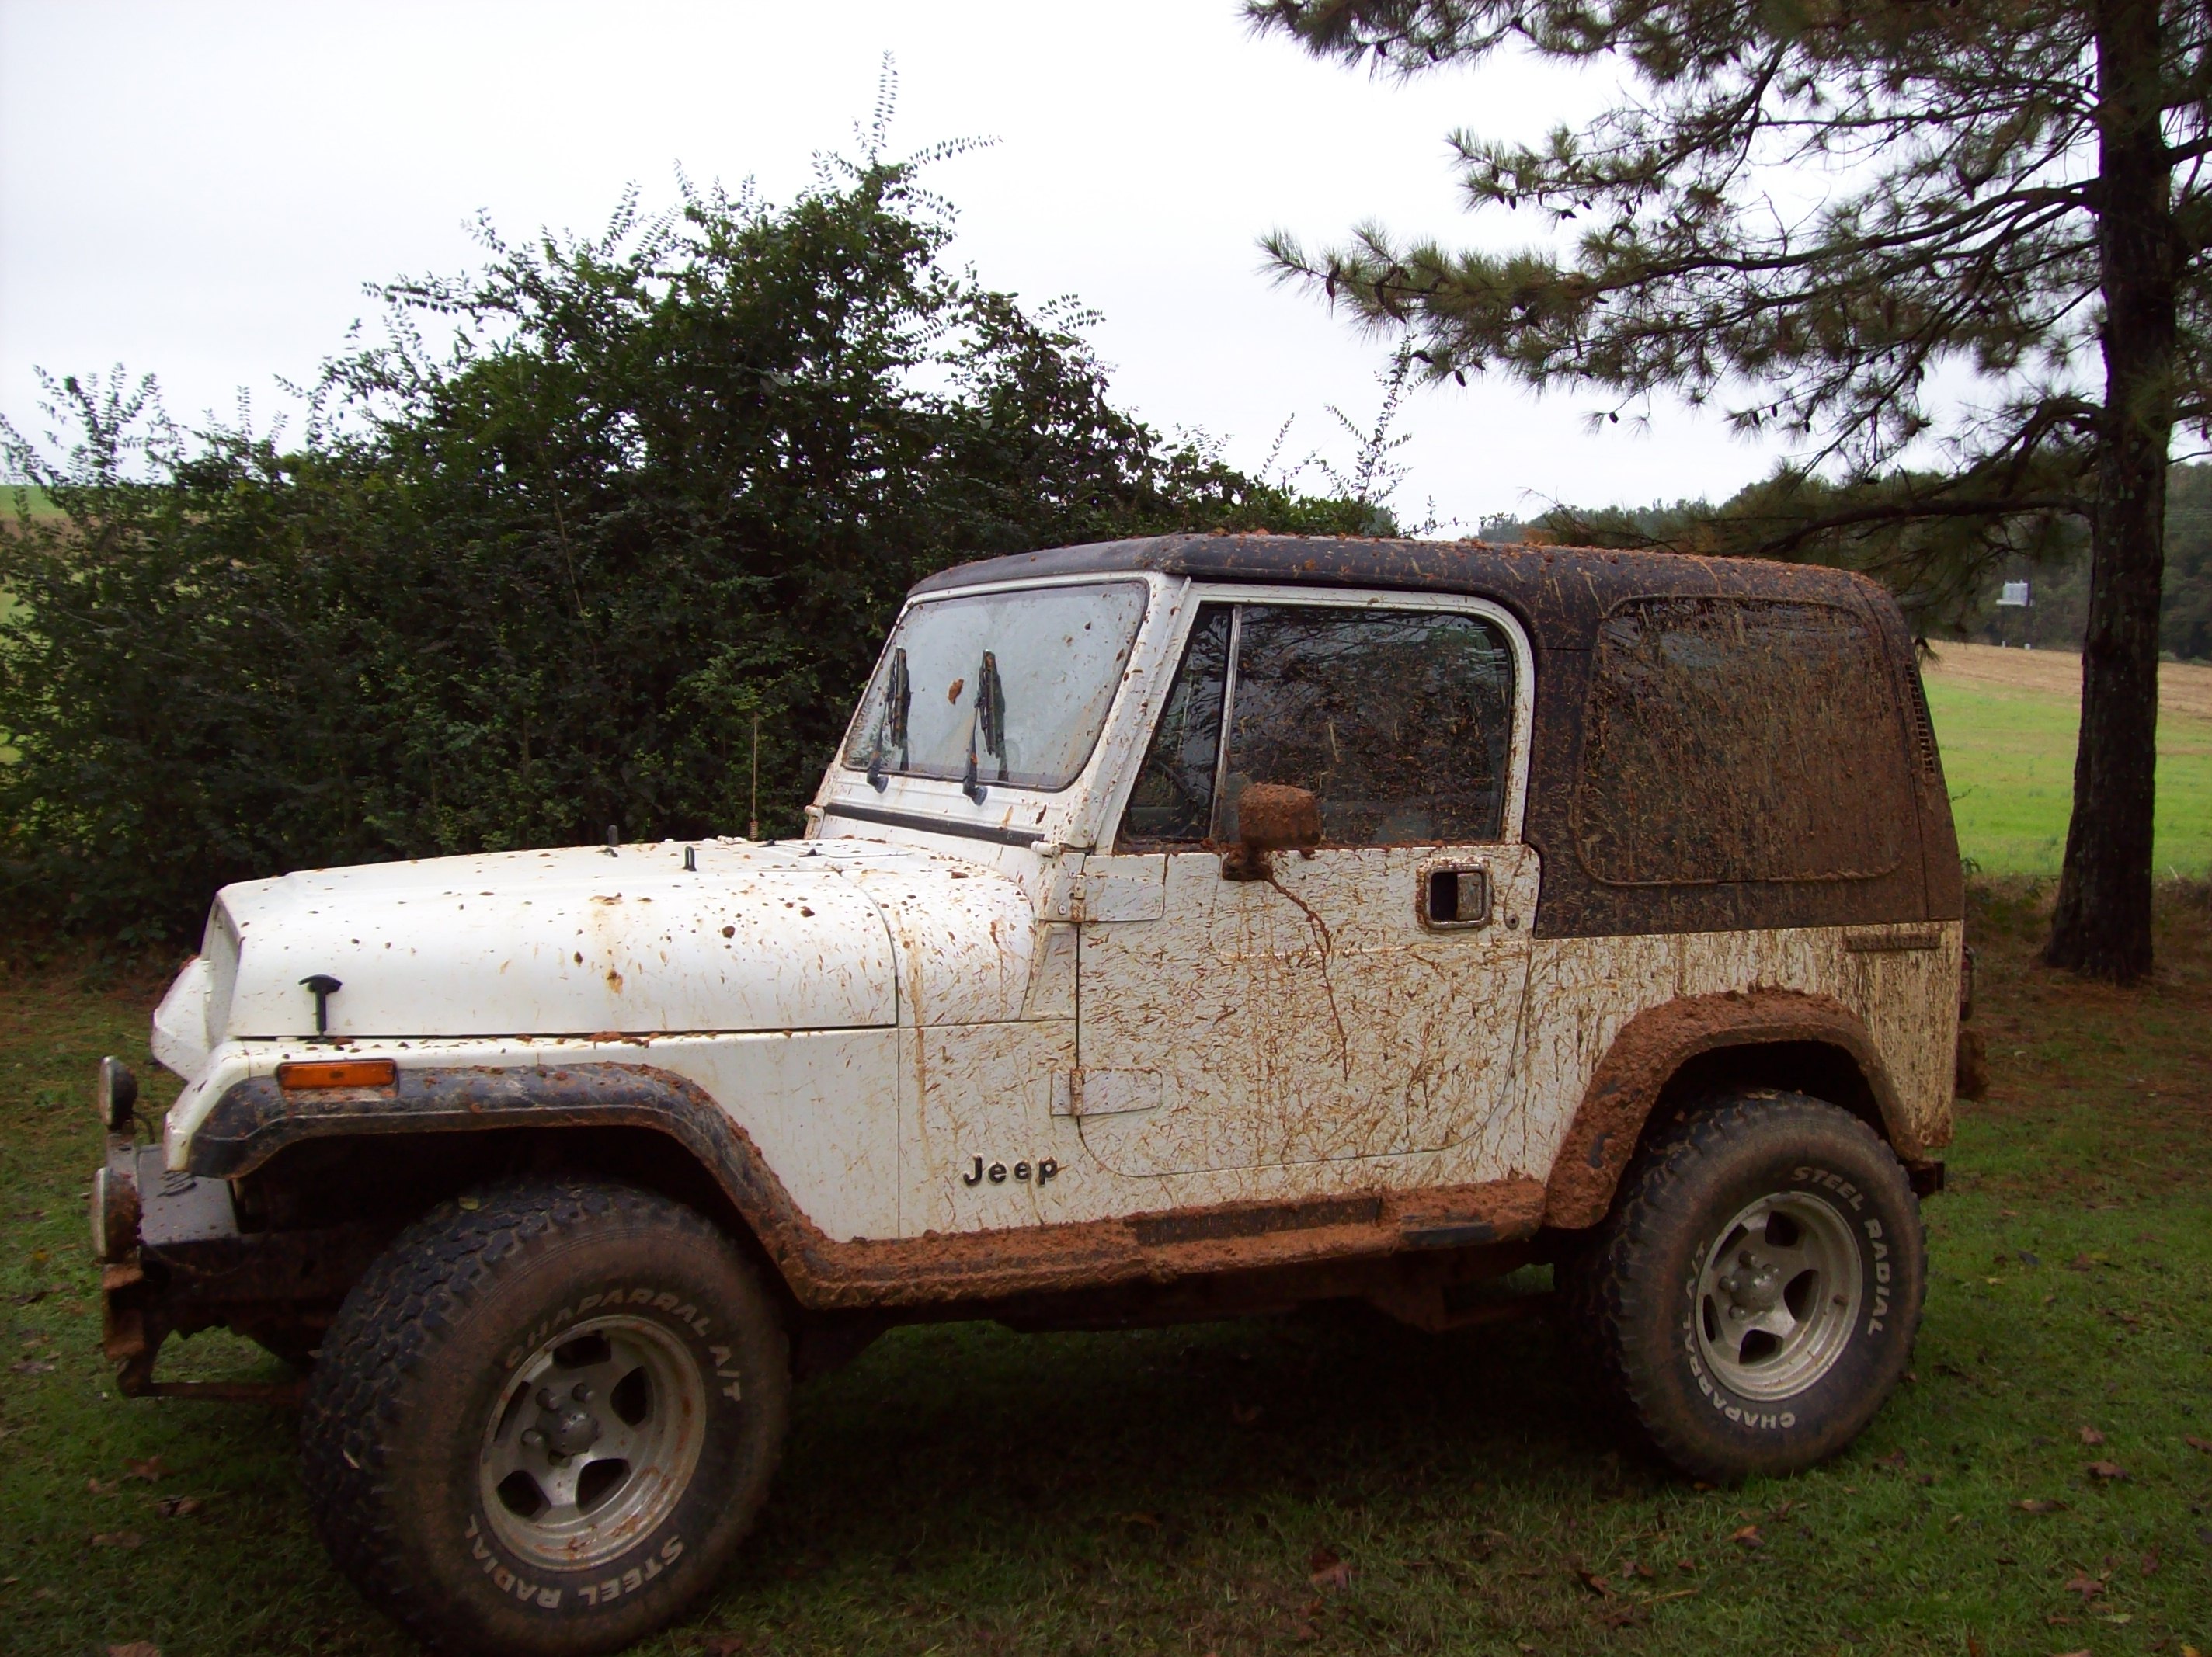 TOOKER OUT FOR A SPIN IN THE MUD